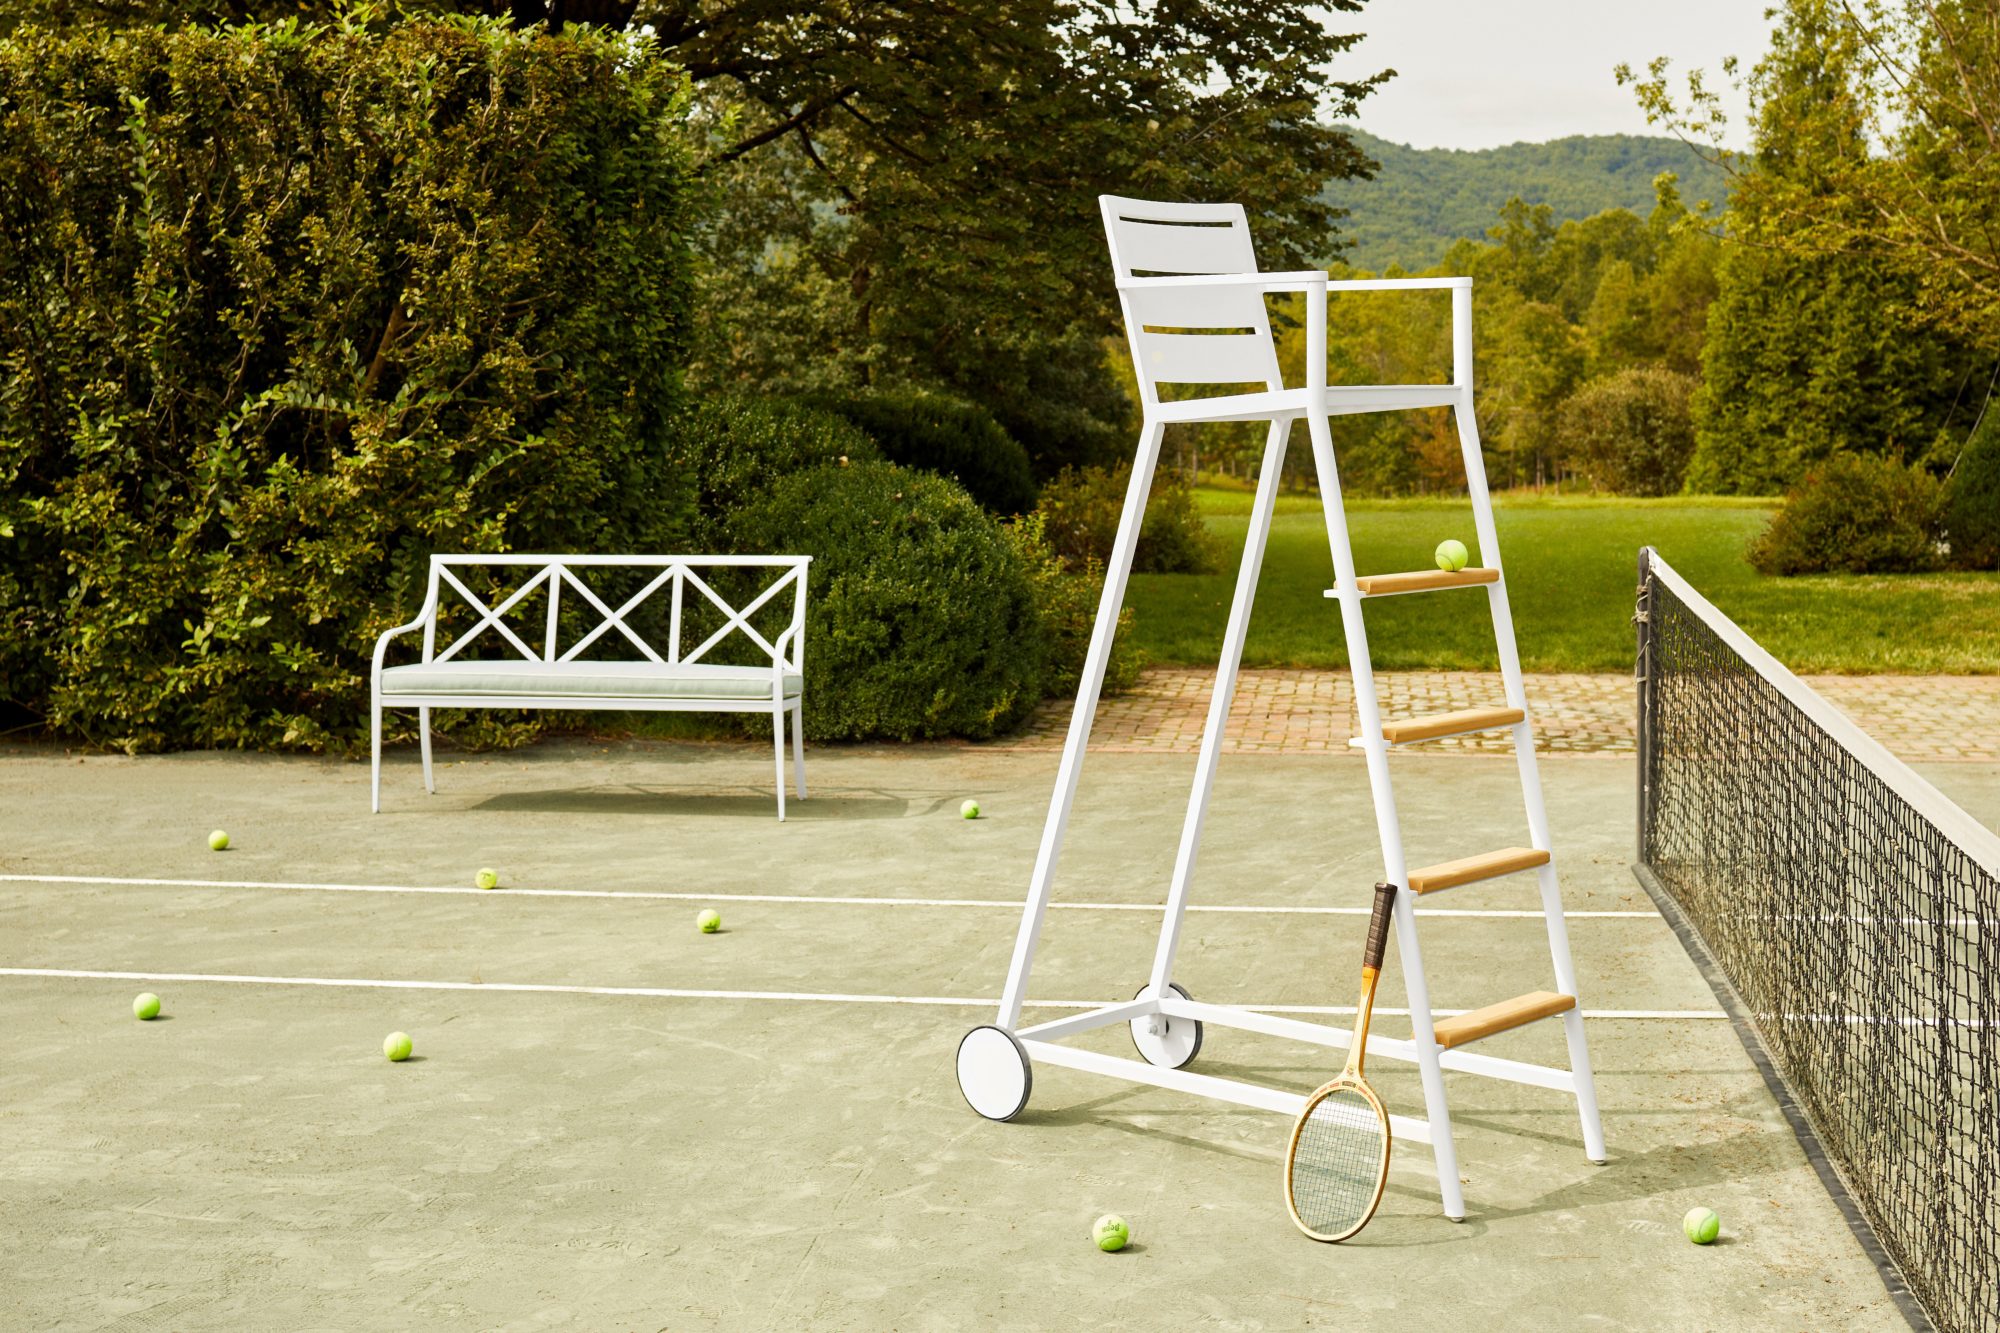 McKinnon and Harris Drop a Sleek New Umpire Chair Just in Time for the